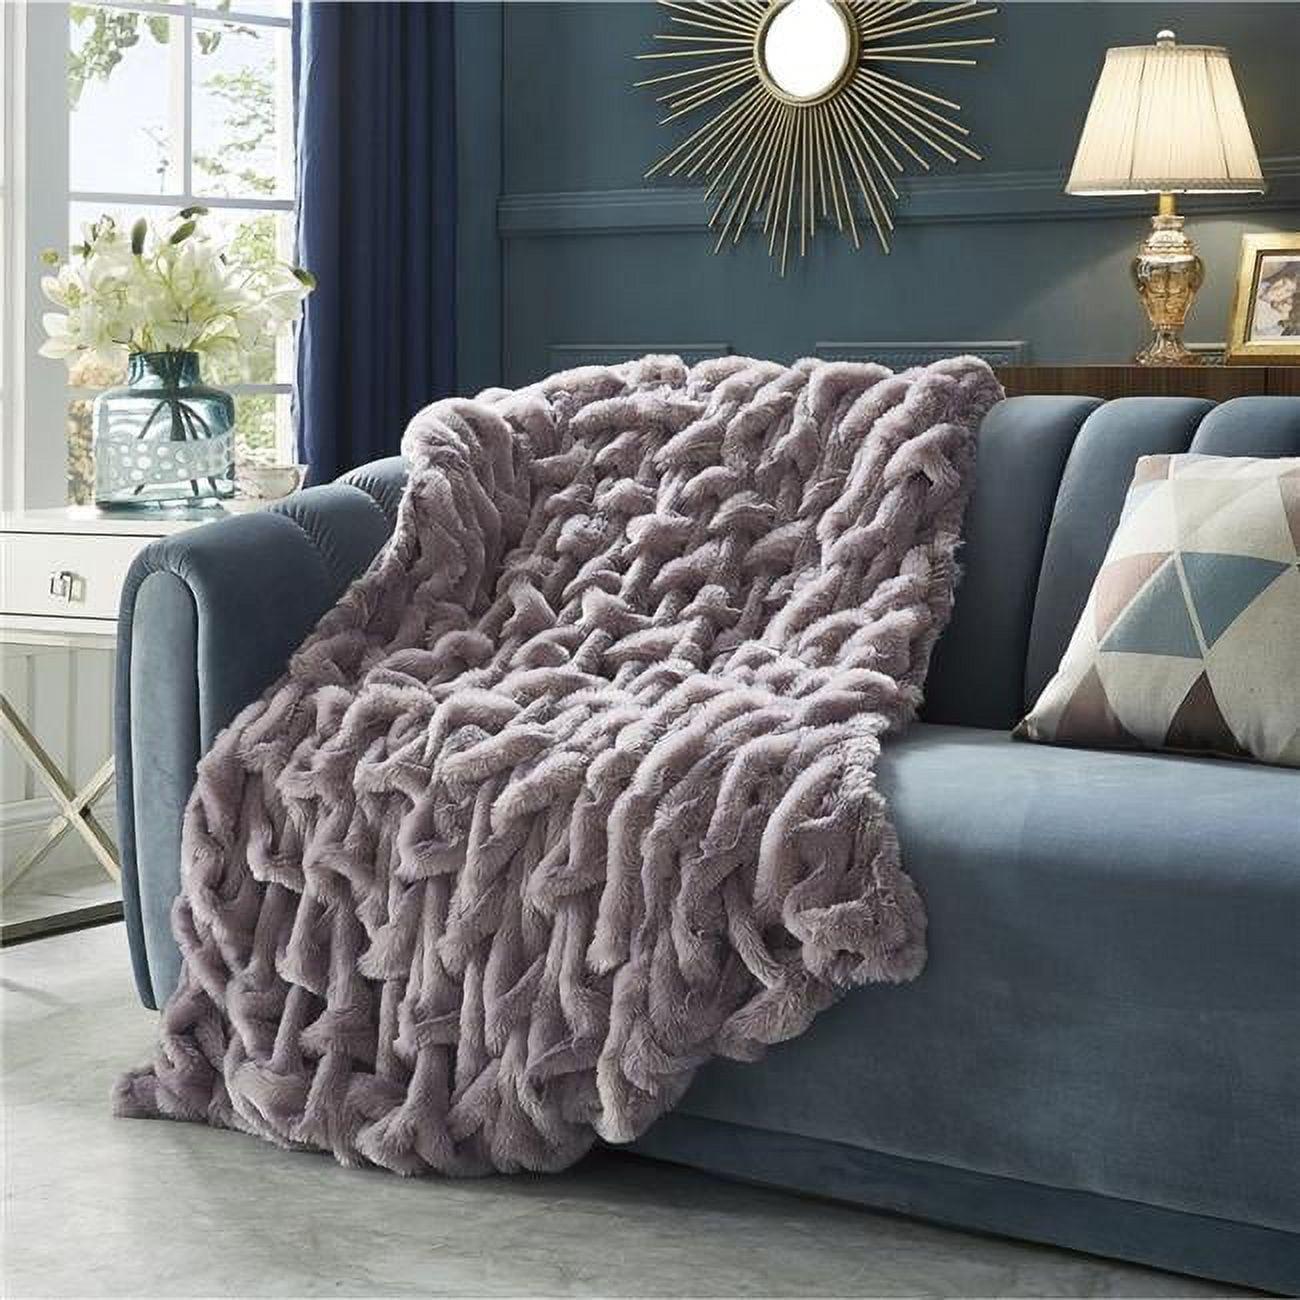 50x60 Ruched Faux Fur Throw Blanket Gray - Madison Park